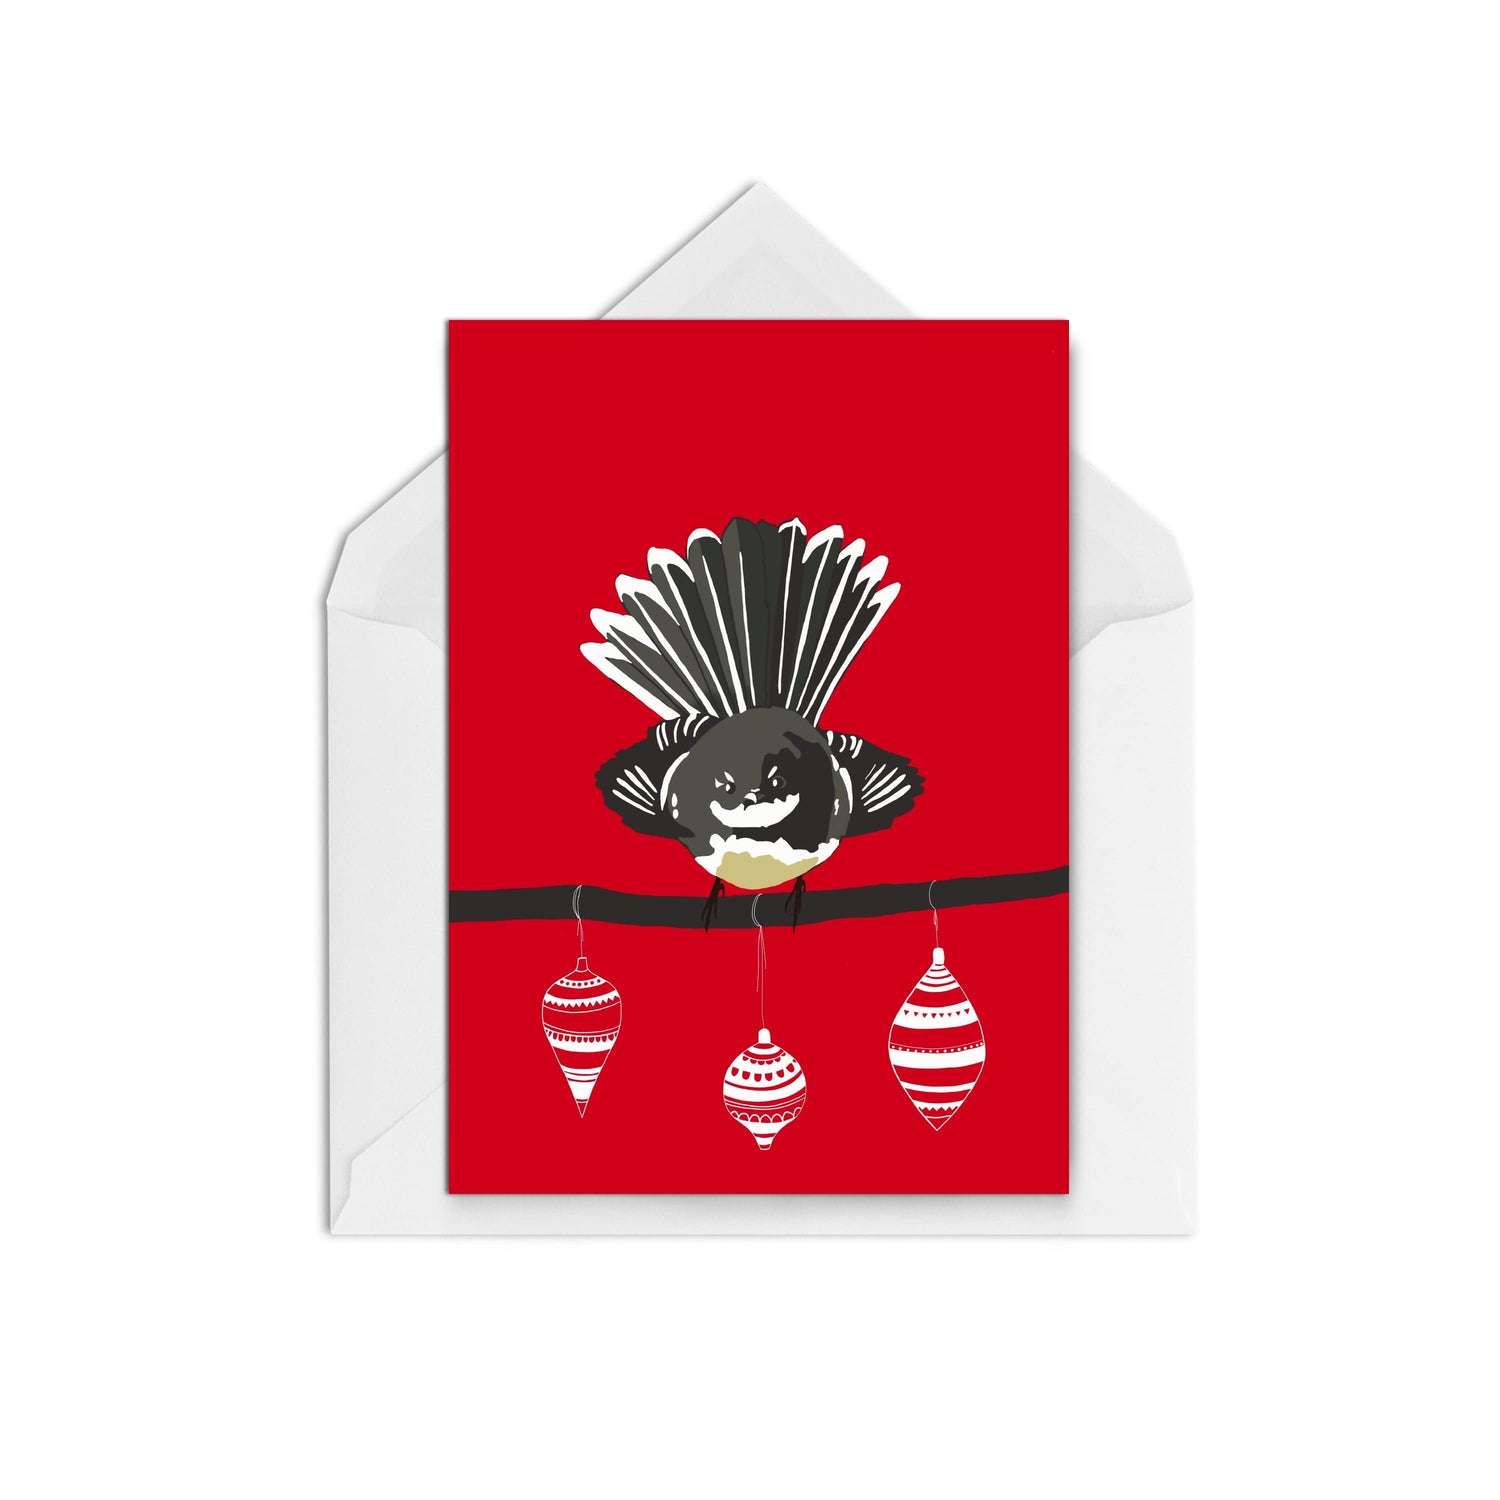 Pack Of 20 Christmas Cards - The Paper People Greeting Cards